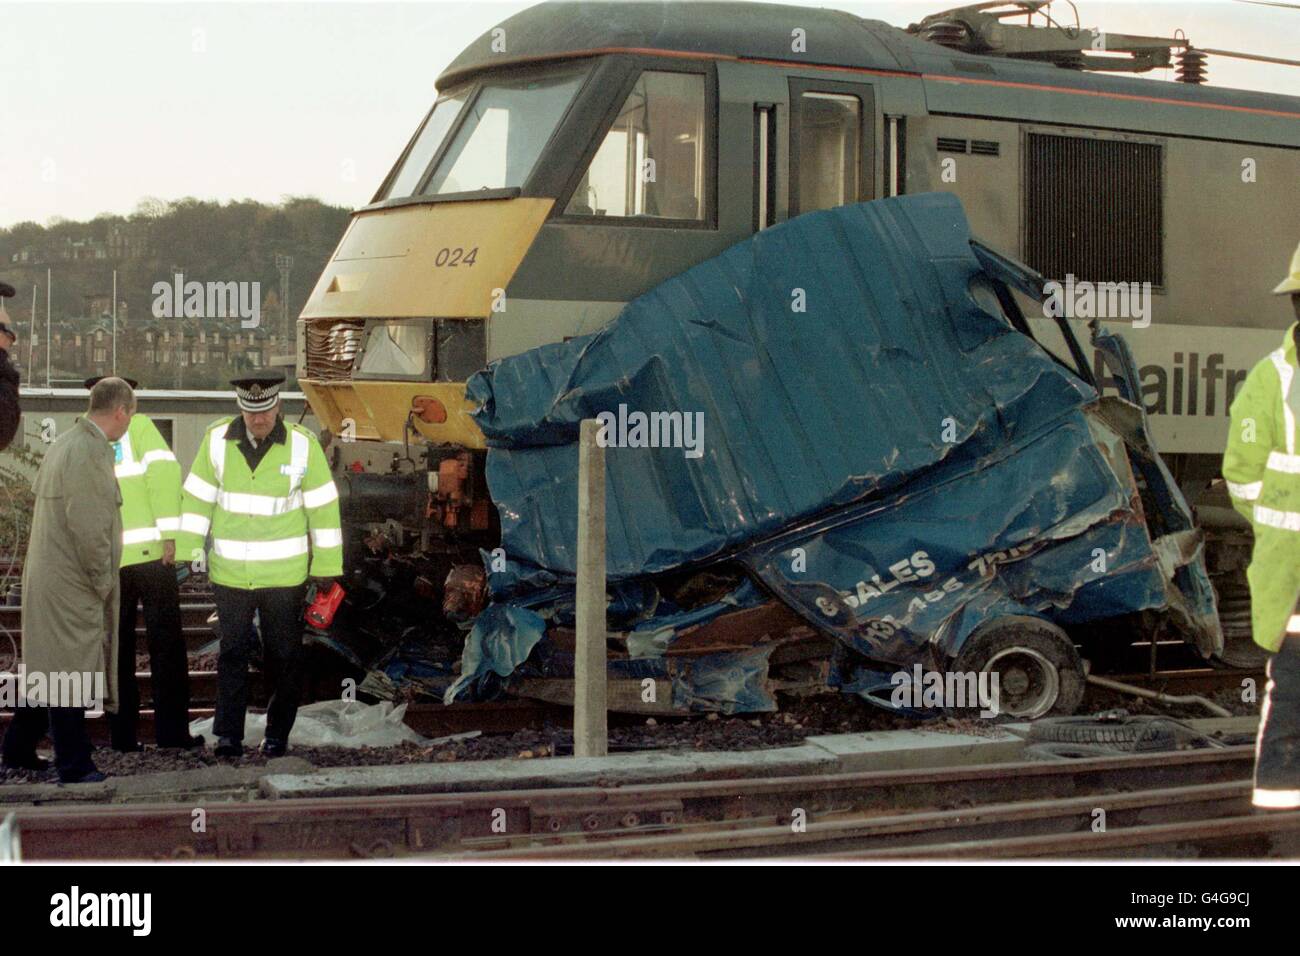 Police attend the scene at Slateford in Edinburgh early today Monday 16th November, 1998, after the London to Inverness sleeper crashed into two abandoned vans on the stretch of railway line near Edinburgh. The sleeper was carrying 140 passengers when it crashed, but no-one was hurt police said Photo by Tony J Haresign. See PA story Stock Photo